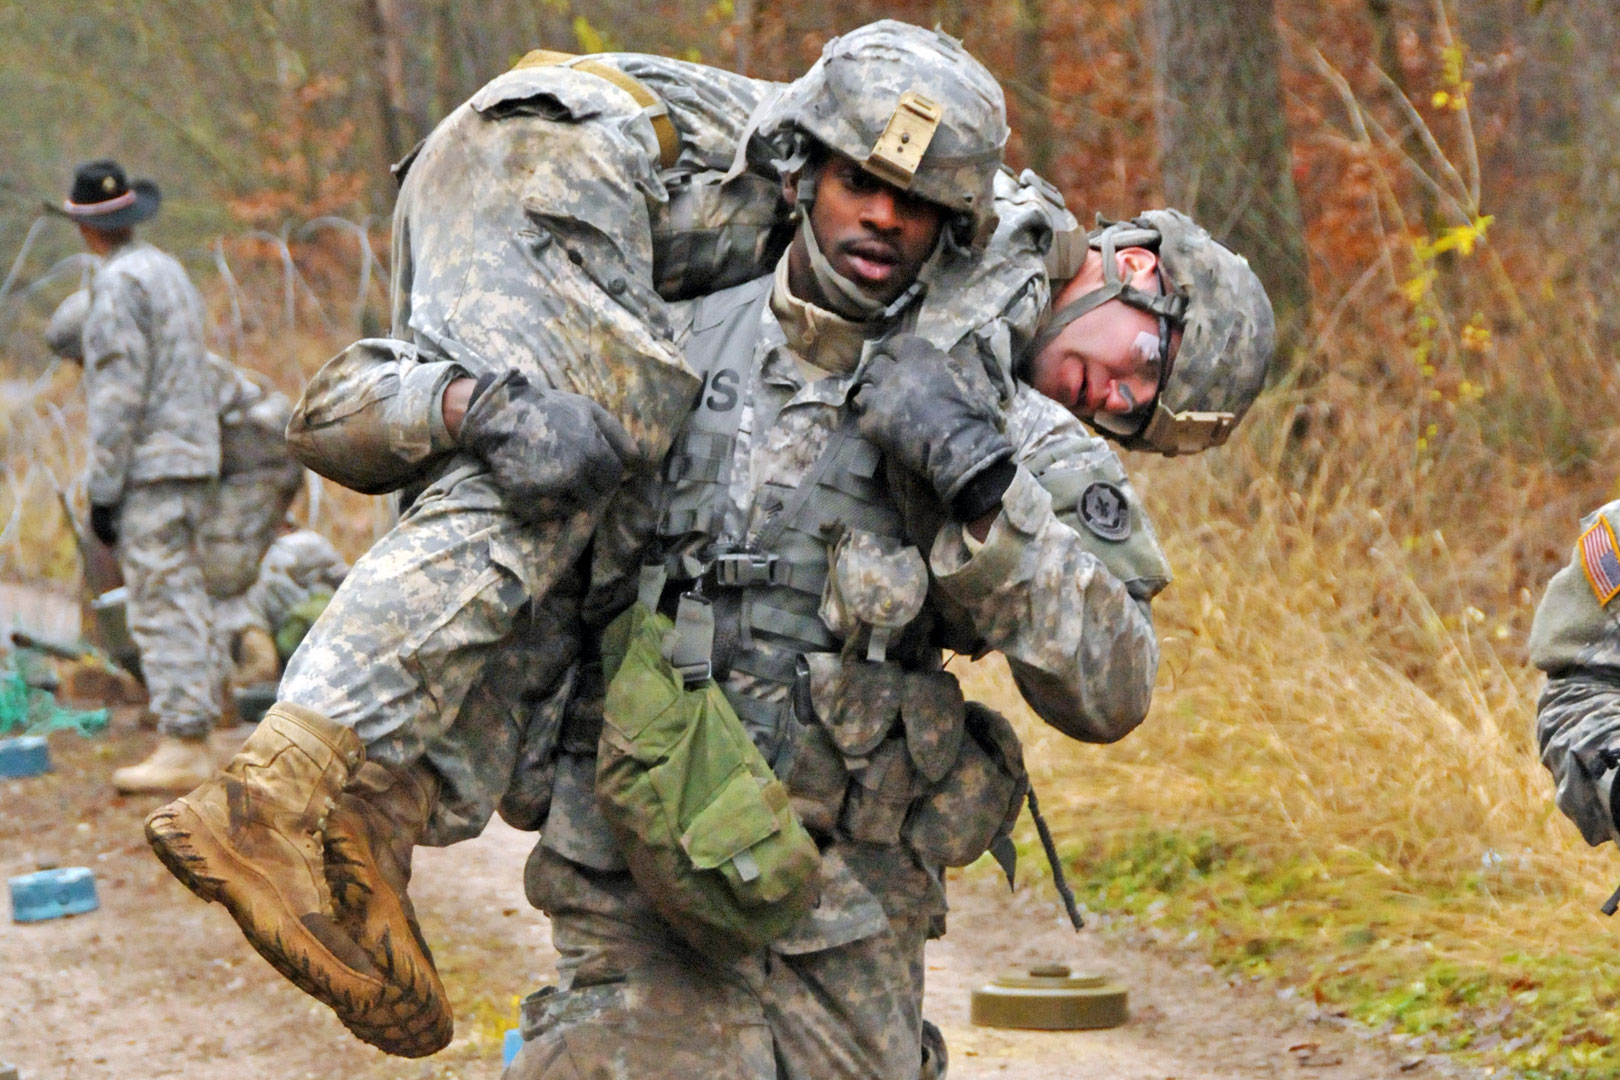 A Soldier carrying another Soldier on his back